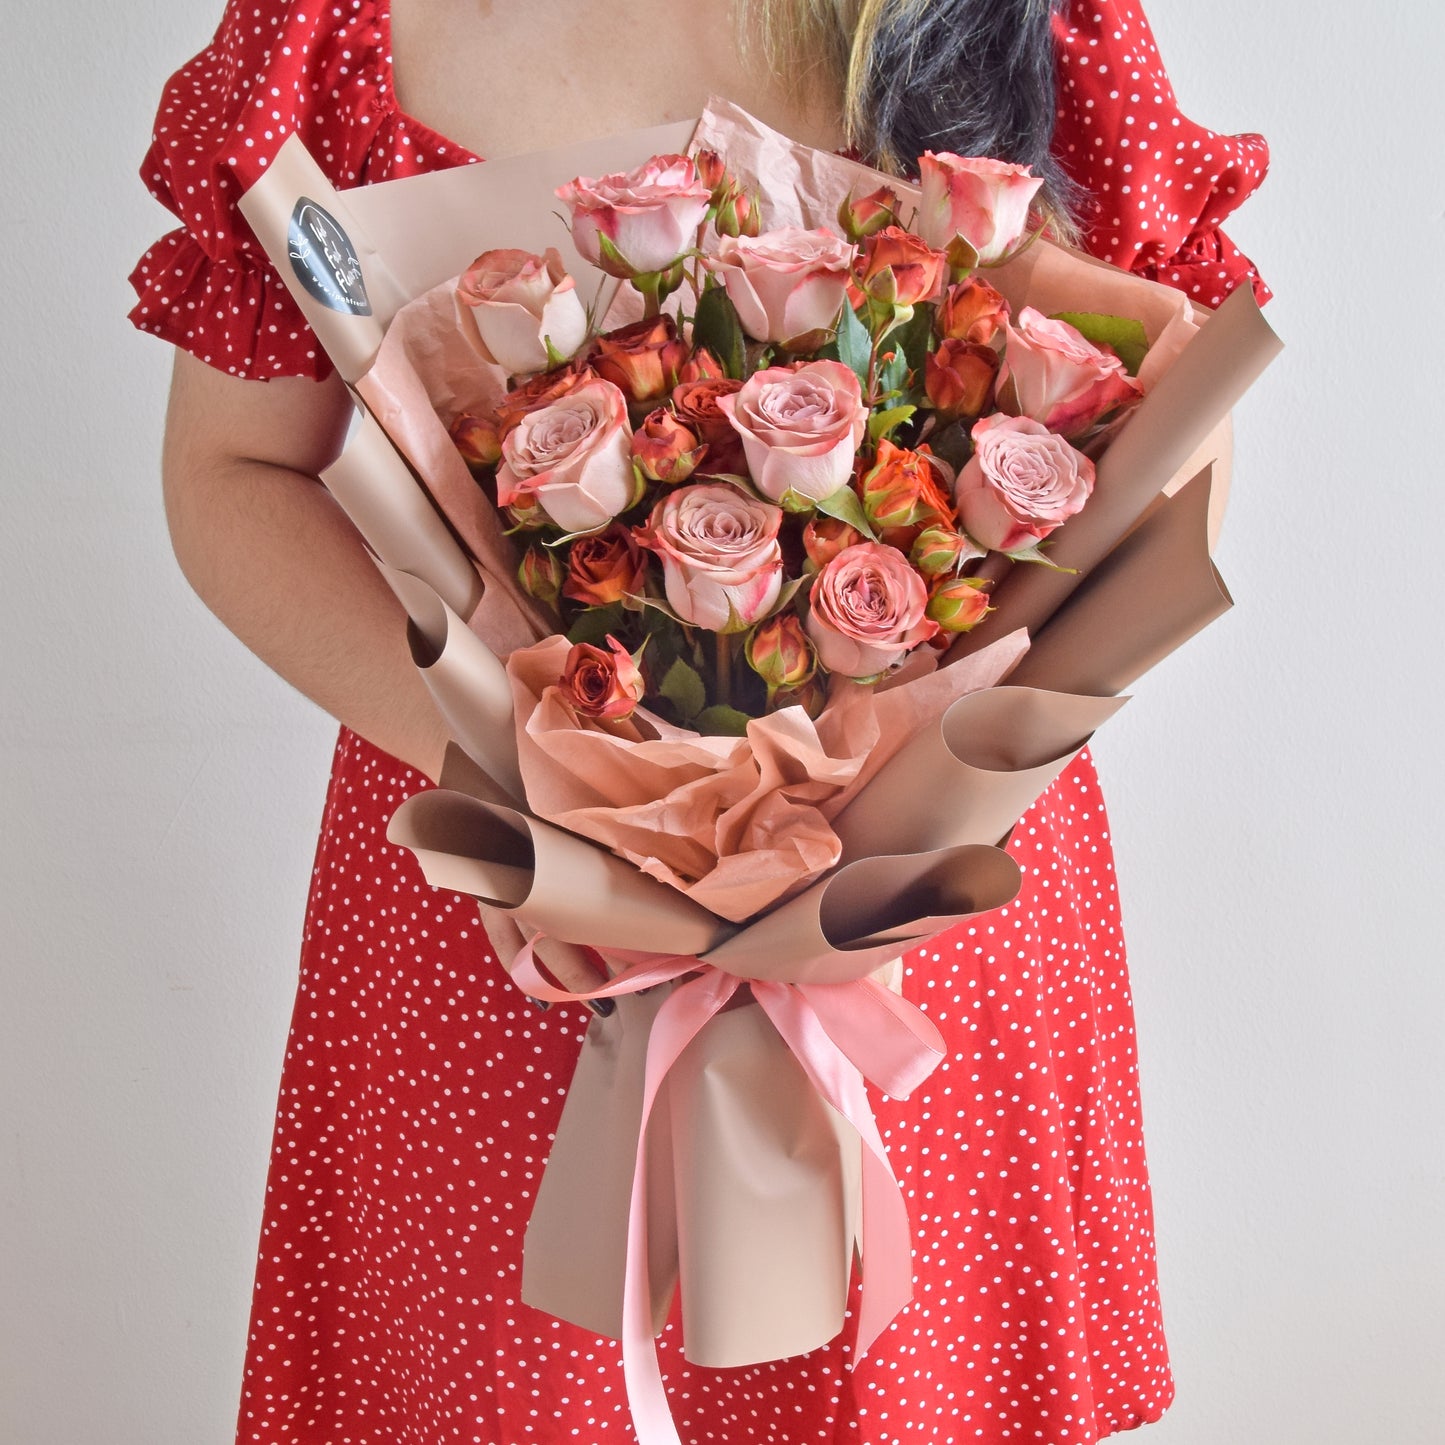 Cappuccino Rose| Valentine Fresh Flower Bouquet| Same Day Delivery